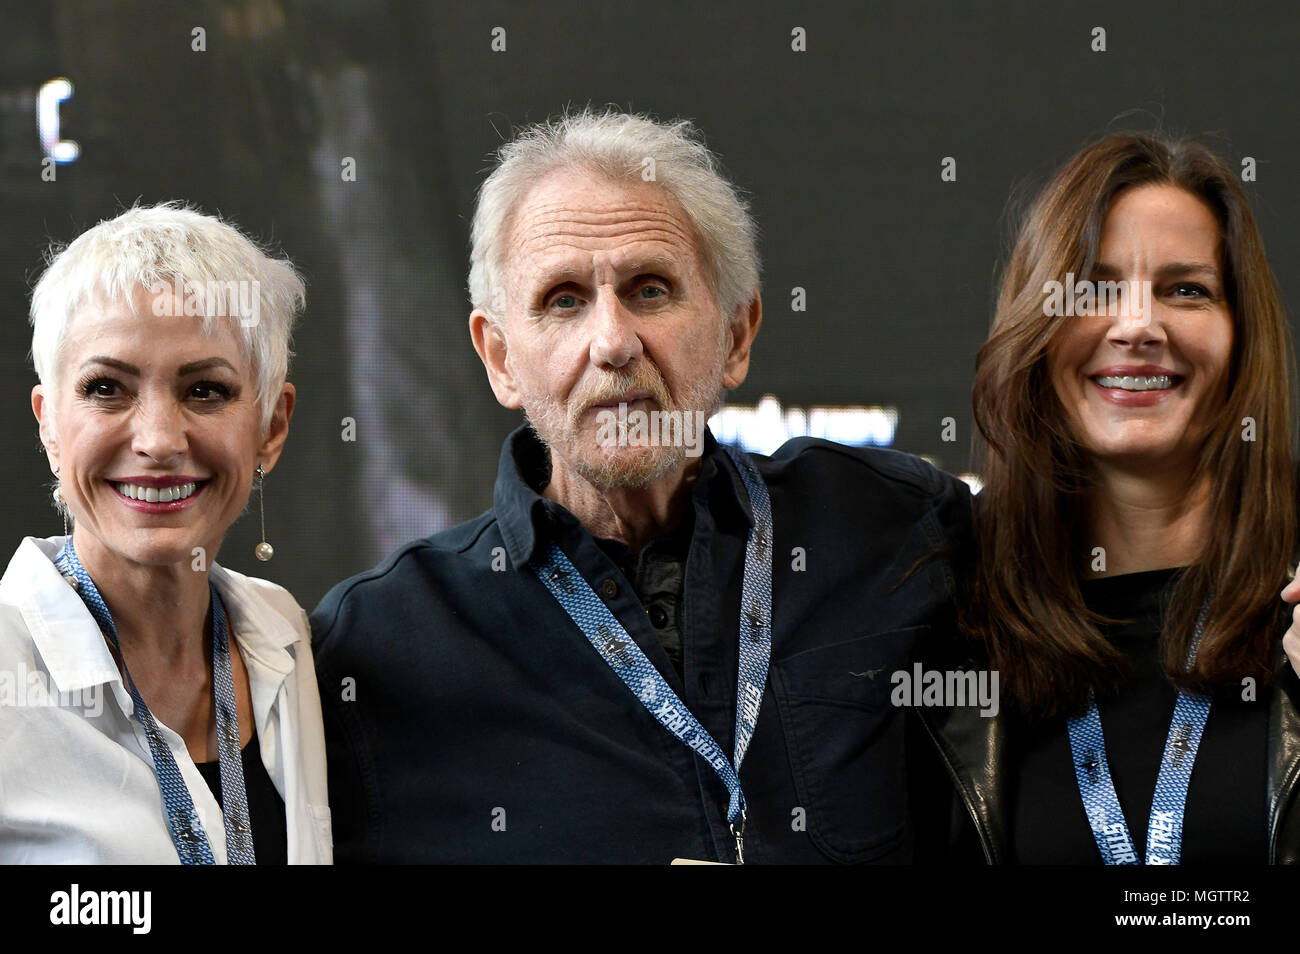 Dortmund, Germany. 27th Apr, 2018. Nana Visitor, Rene Auberjonis and Terry Farrell at the Destination Star Trek Germany Convention in the Westfalenhalle. Dortmund, 27.04.2018 | usage worldwide Credit: dpa picture alliance/Alamy Live News Stock Photo